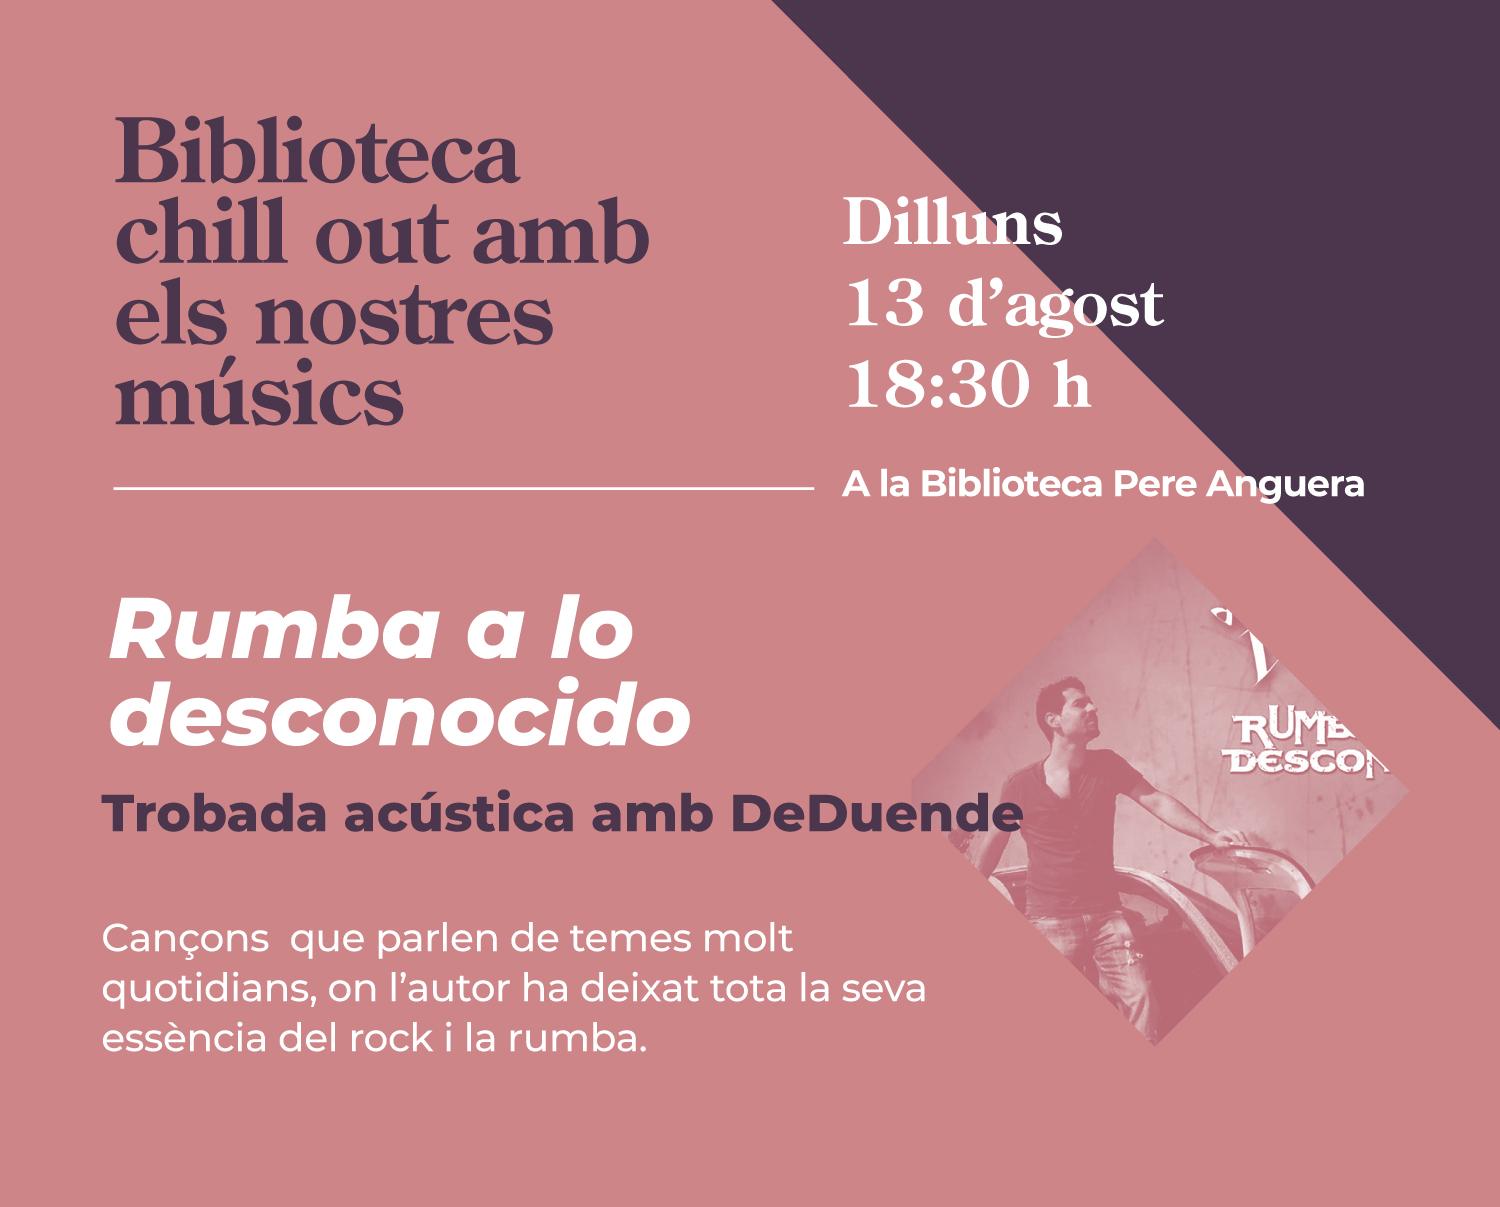 Biblioteques Chill Out. DeDuende